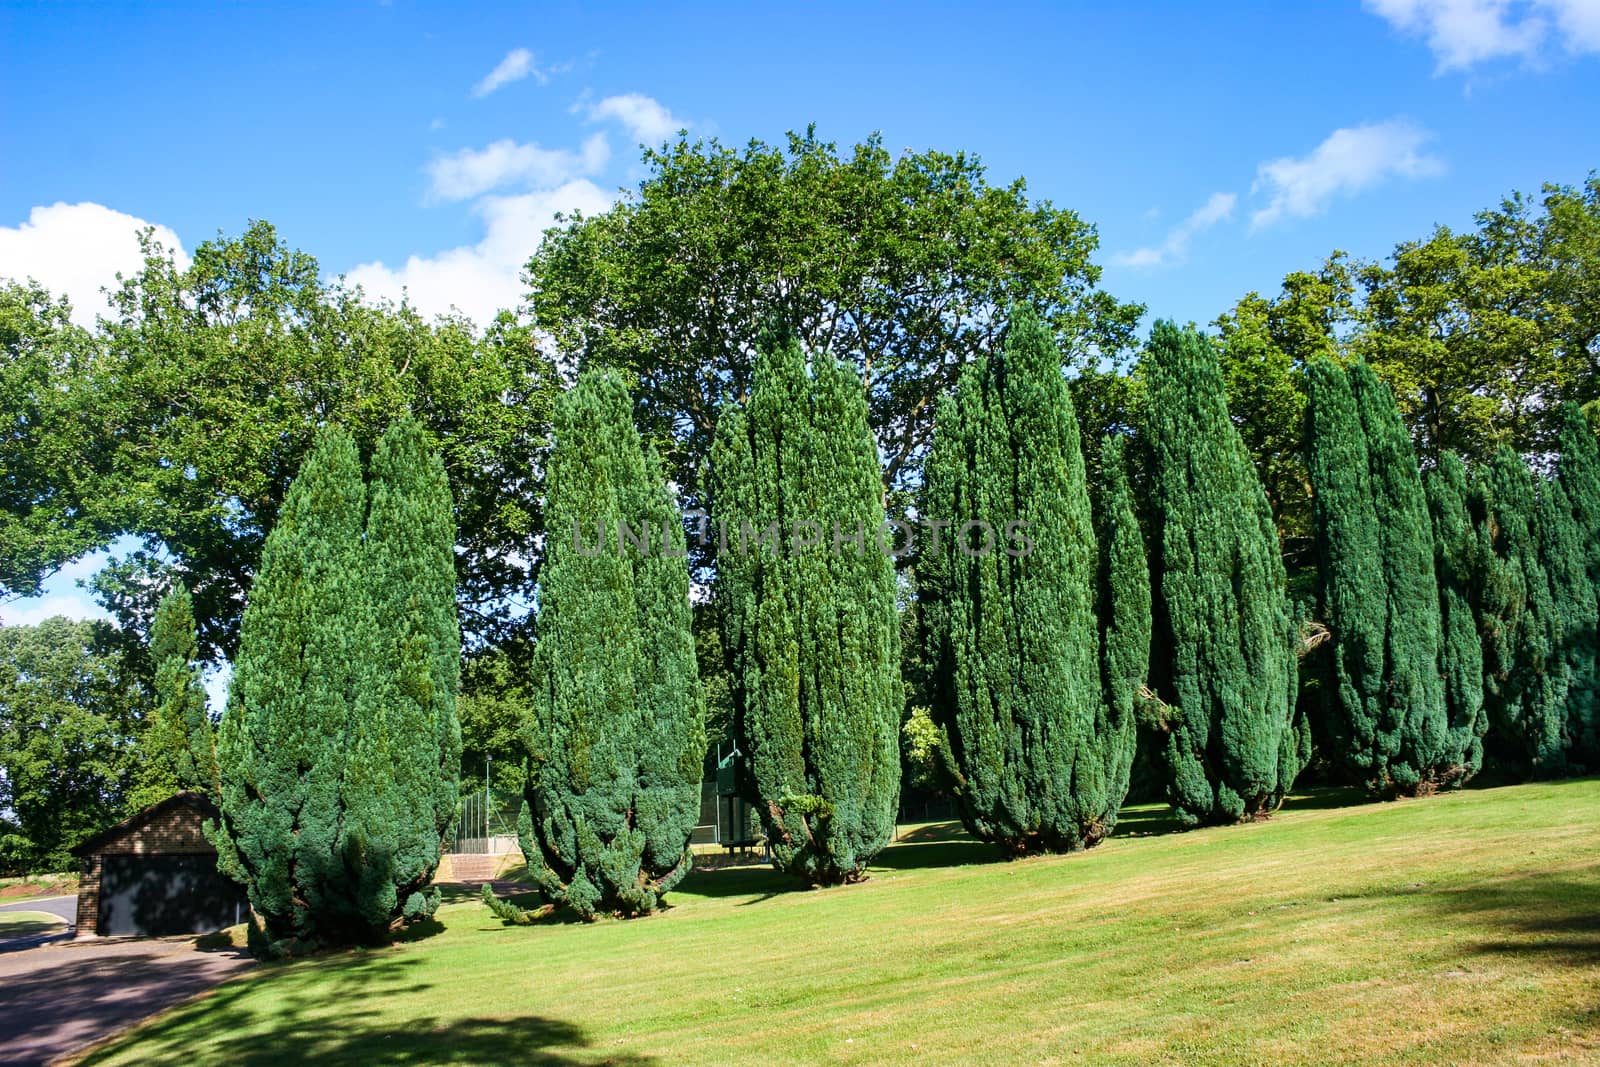 A row of evergreen conifer trees in summer